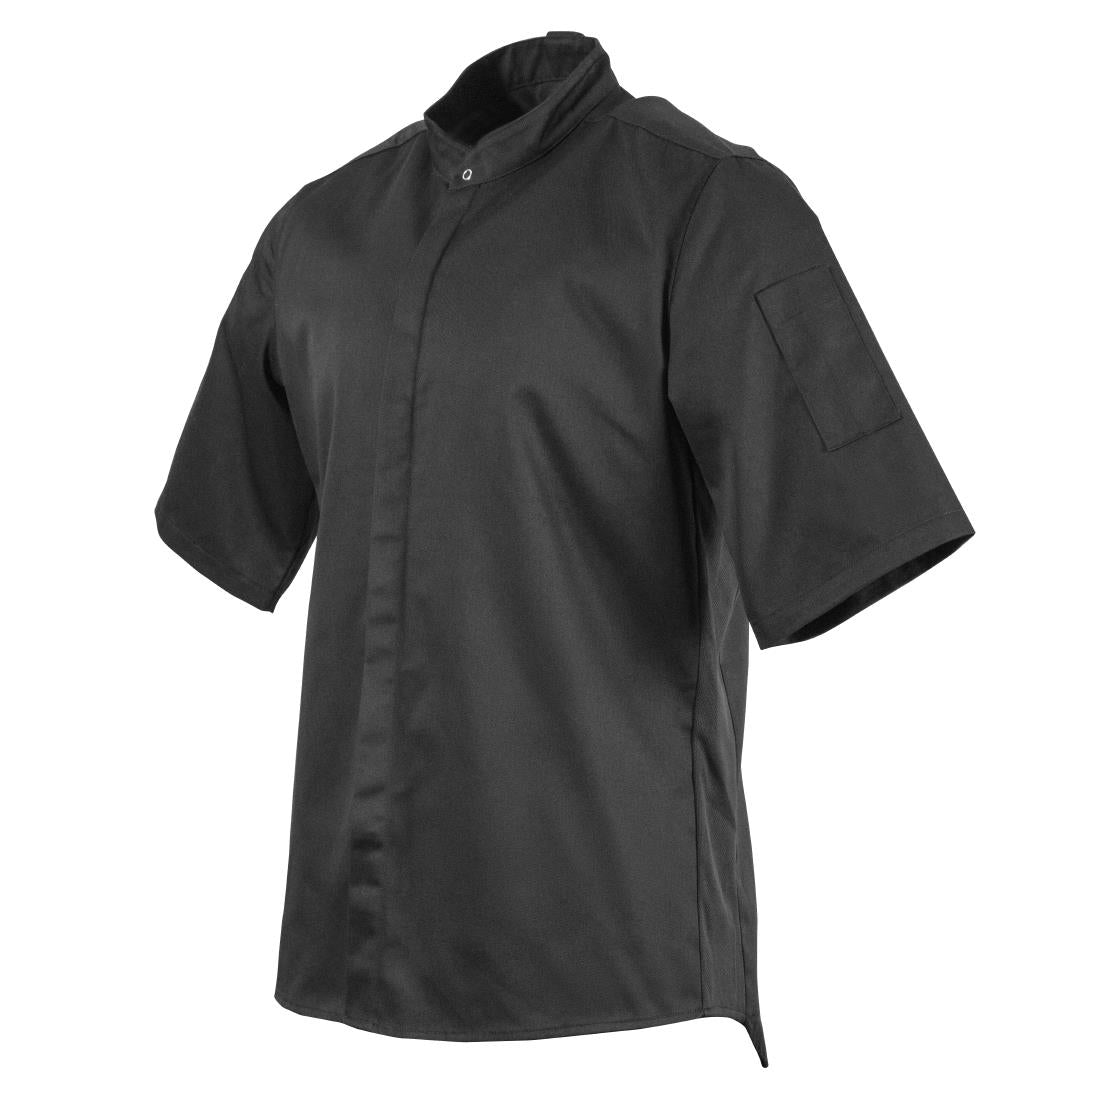 BB711-XL Southside Band Collar Chefs Jacket Black Size XL JD Catering Equipment Solutions Ltd